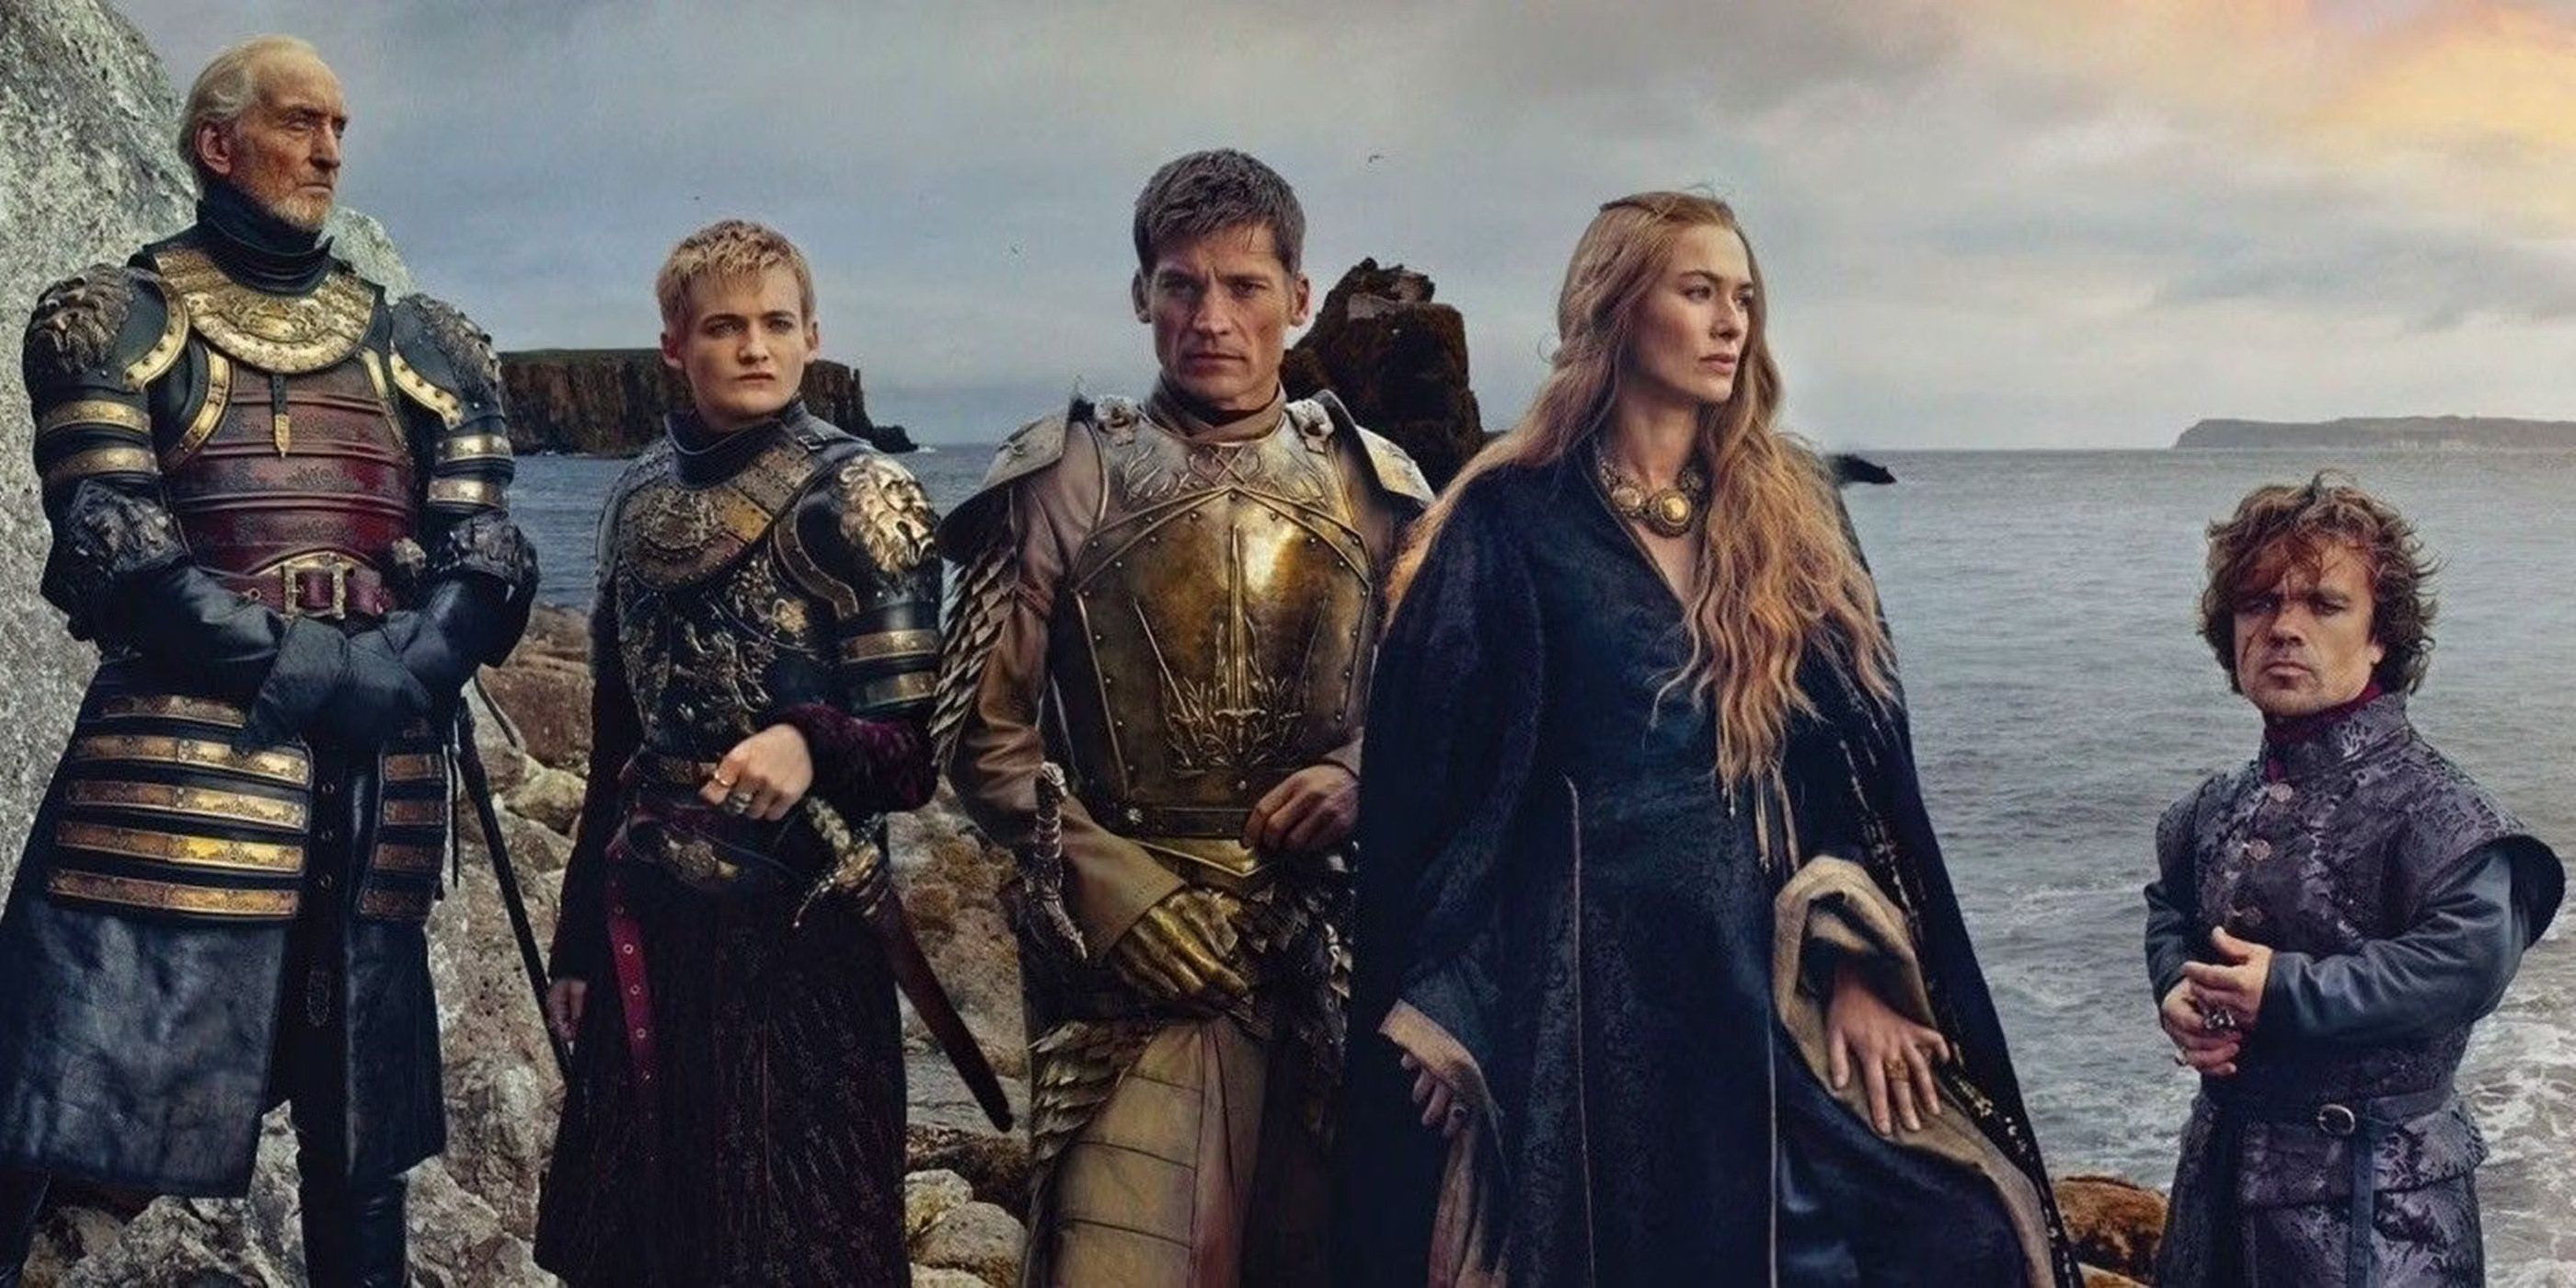 The Lannisters posing on a beach